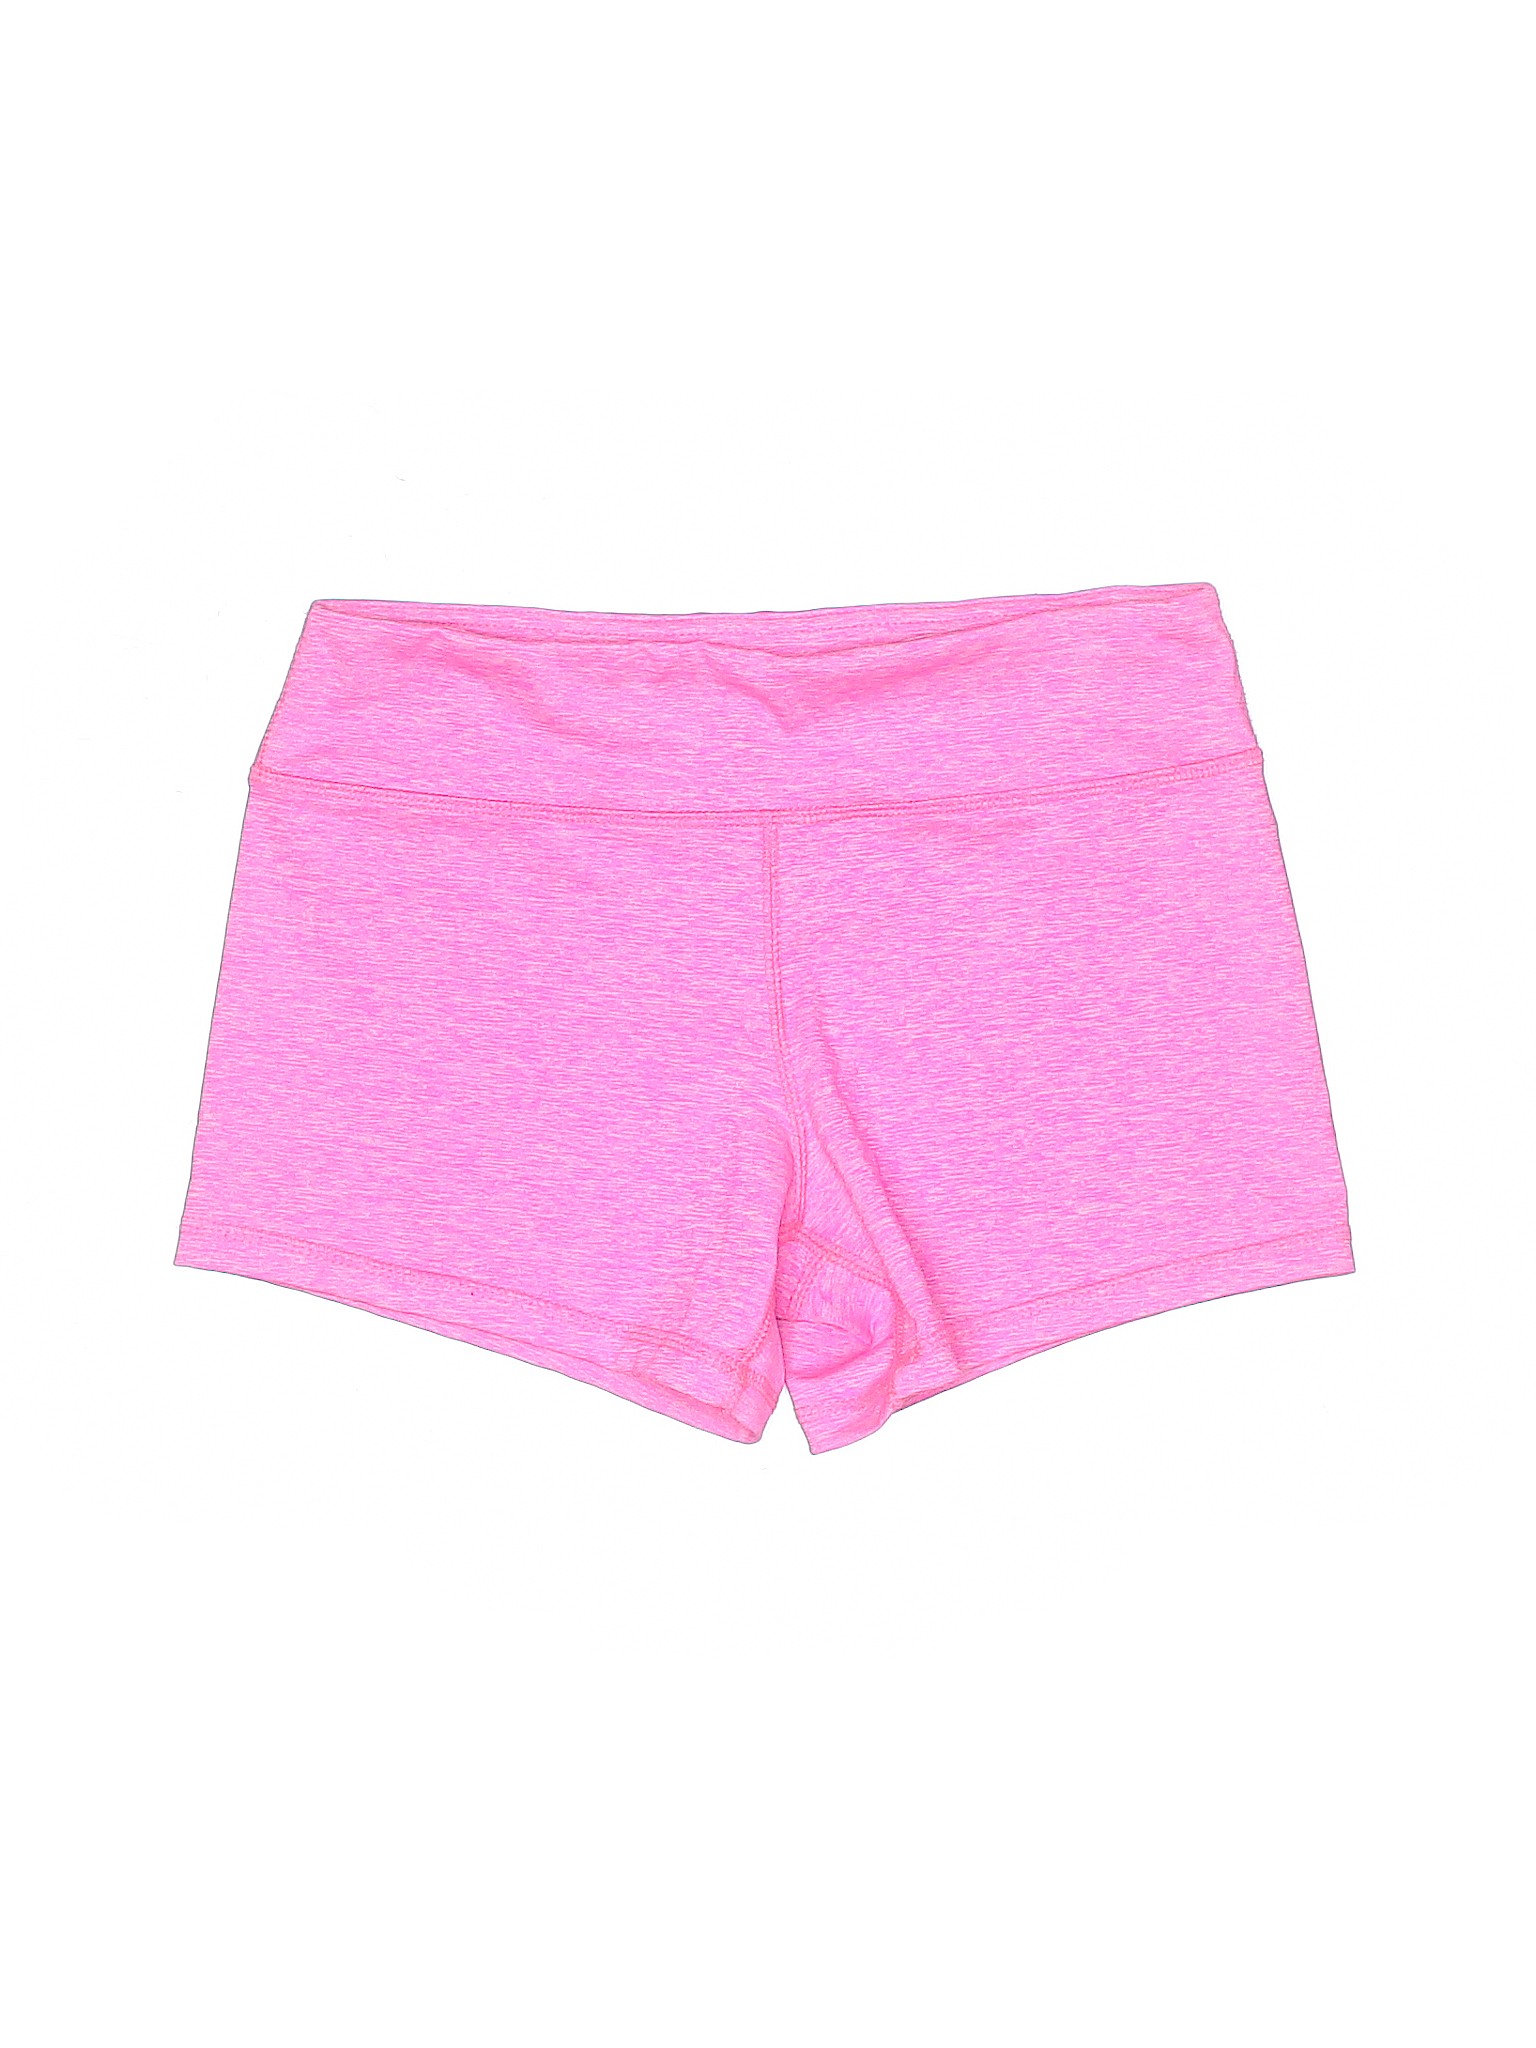 Assorted Brands Pink Athletic Shorts Size S - 58% off | thredUP